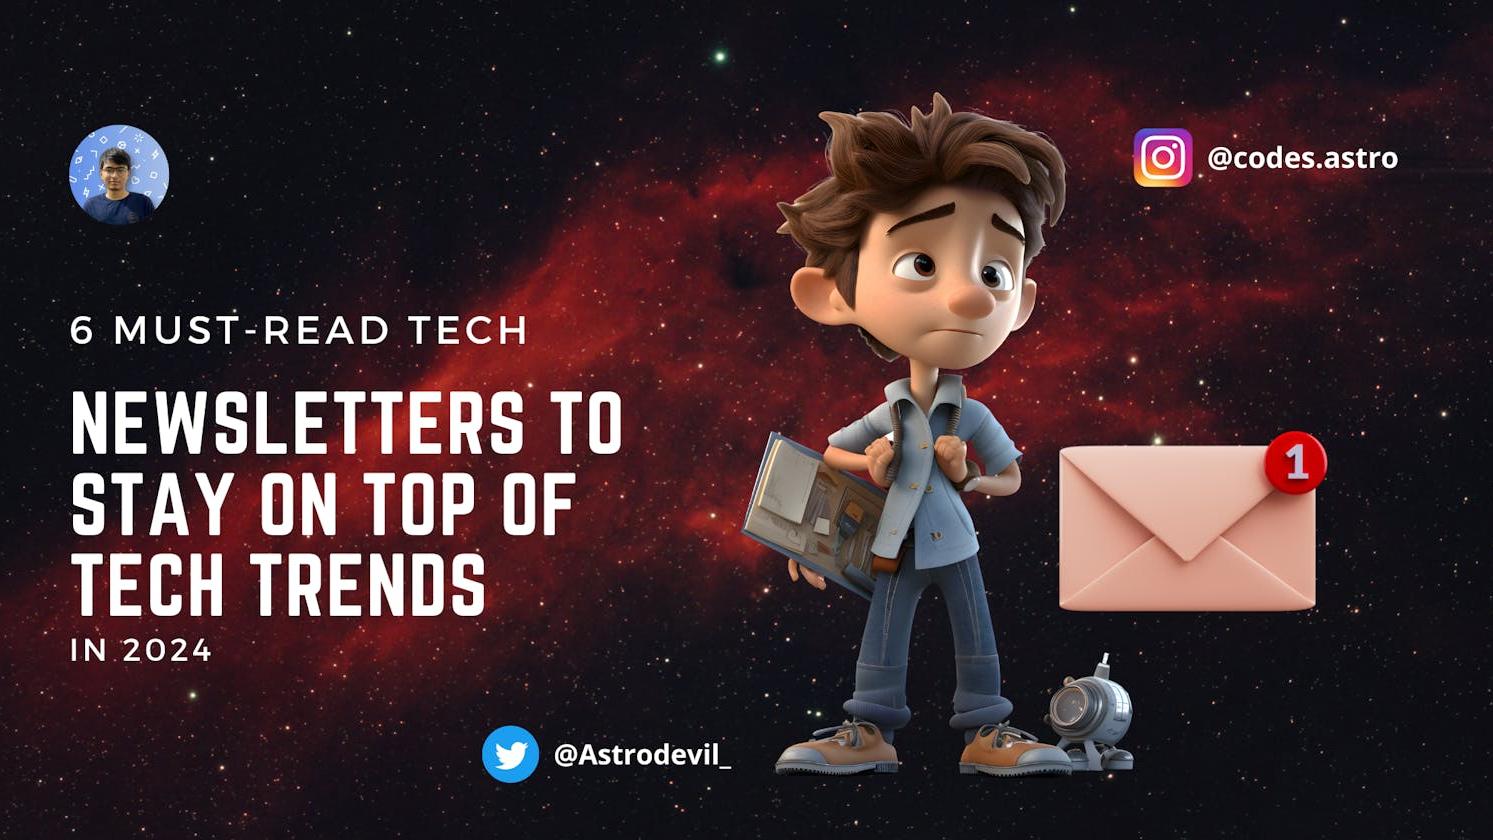 6 Must-Read Tech Newsletters to Keep You Ahead in 2024